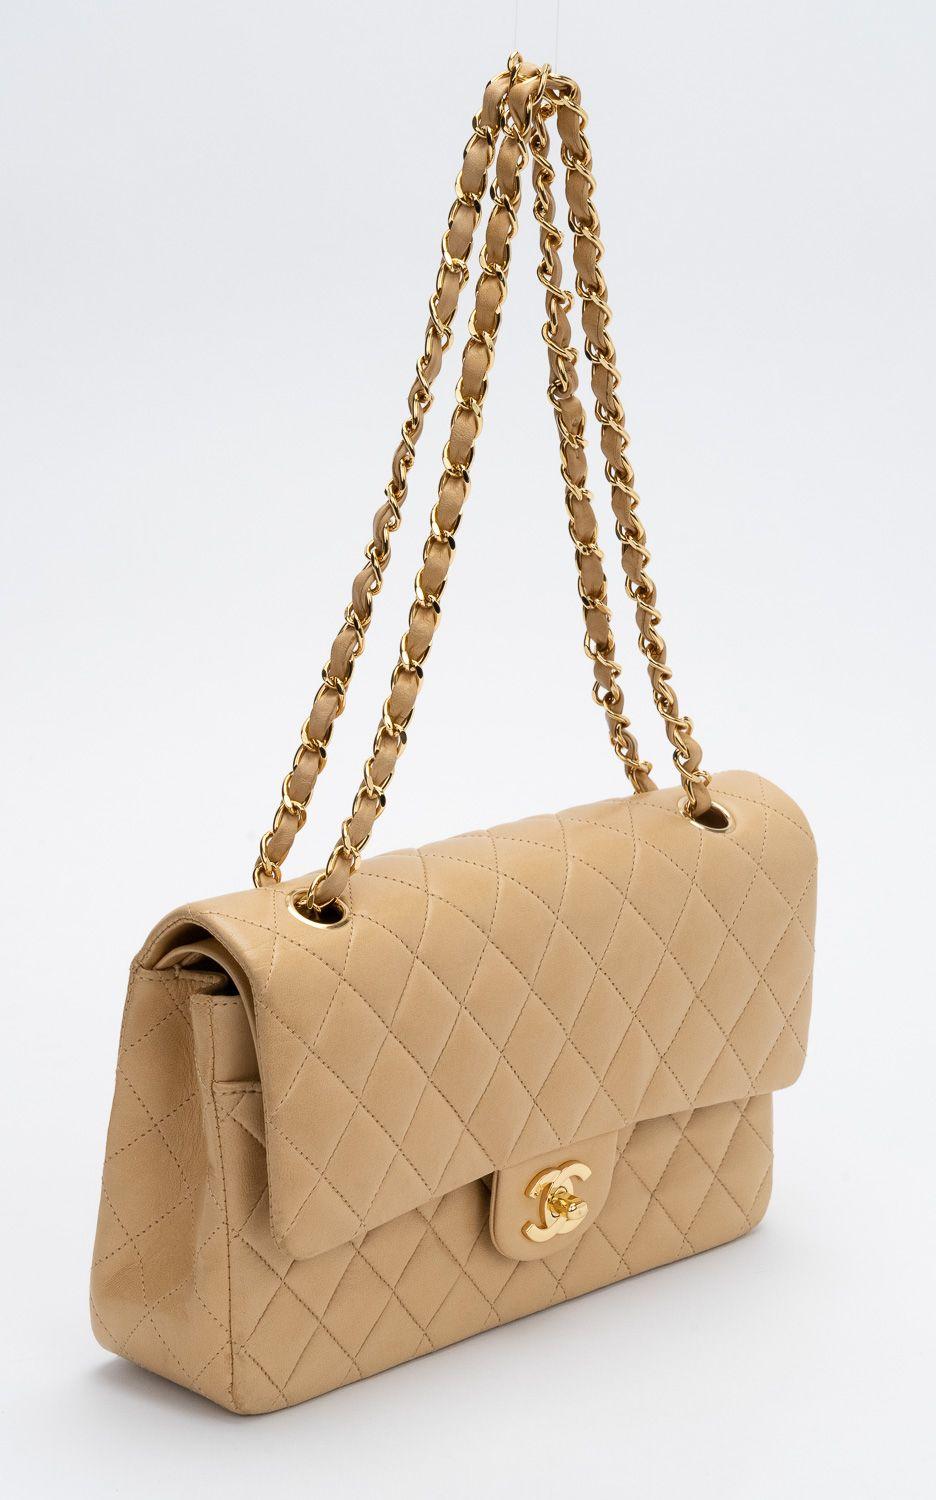 Chanel quilted double flap classic medium bag in beige leather and gold tone hardware. Shoulder drop, 9